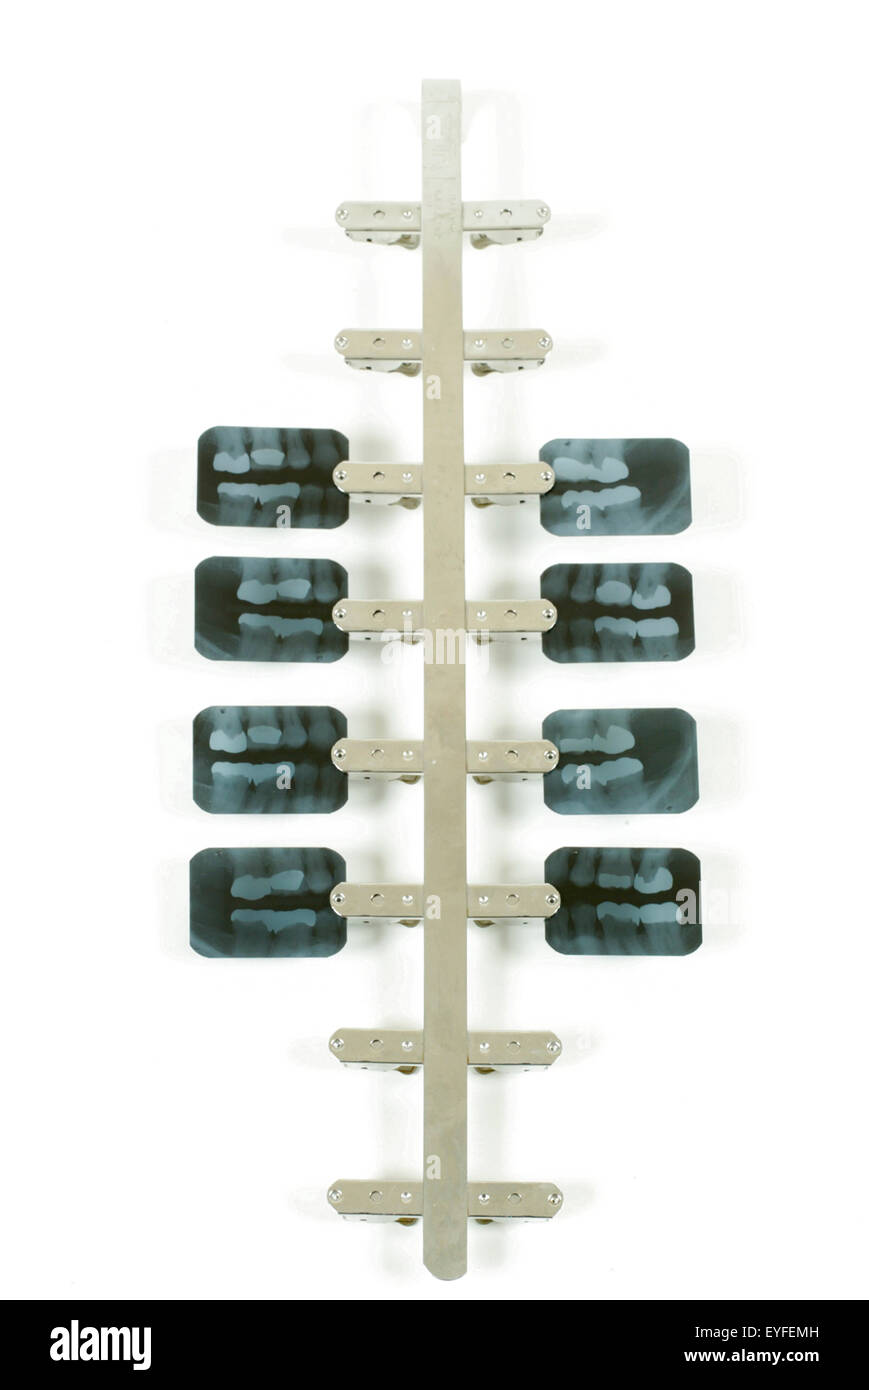 Bitewing dental x-ray images are displayed on a special dental film holder. The bitewing view is taken to visualize the crowns of the posterior teeth and the height of the alveolar bone and are commonly used to examine for cavities. Stock Photo